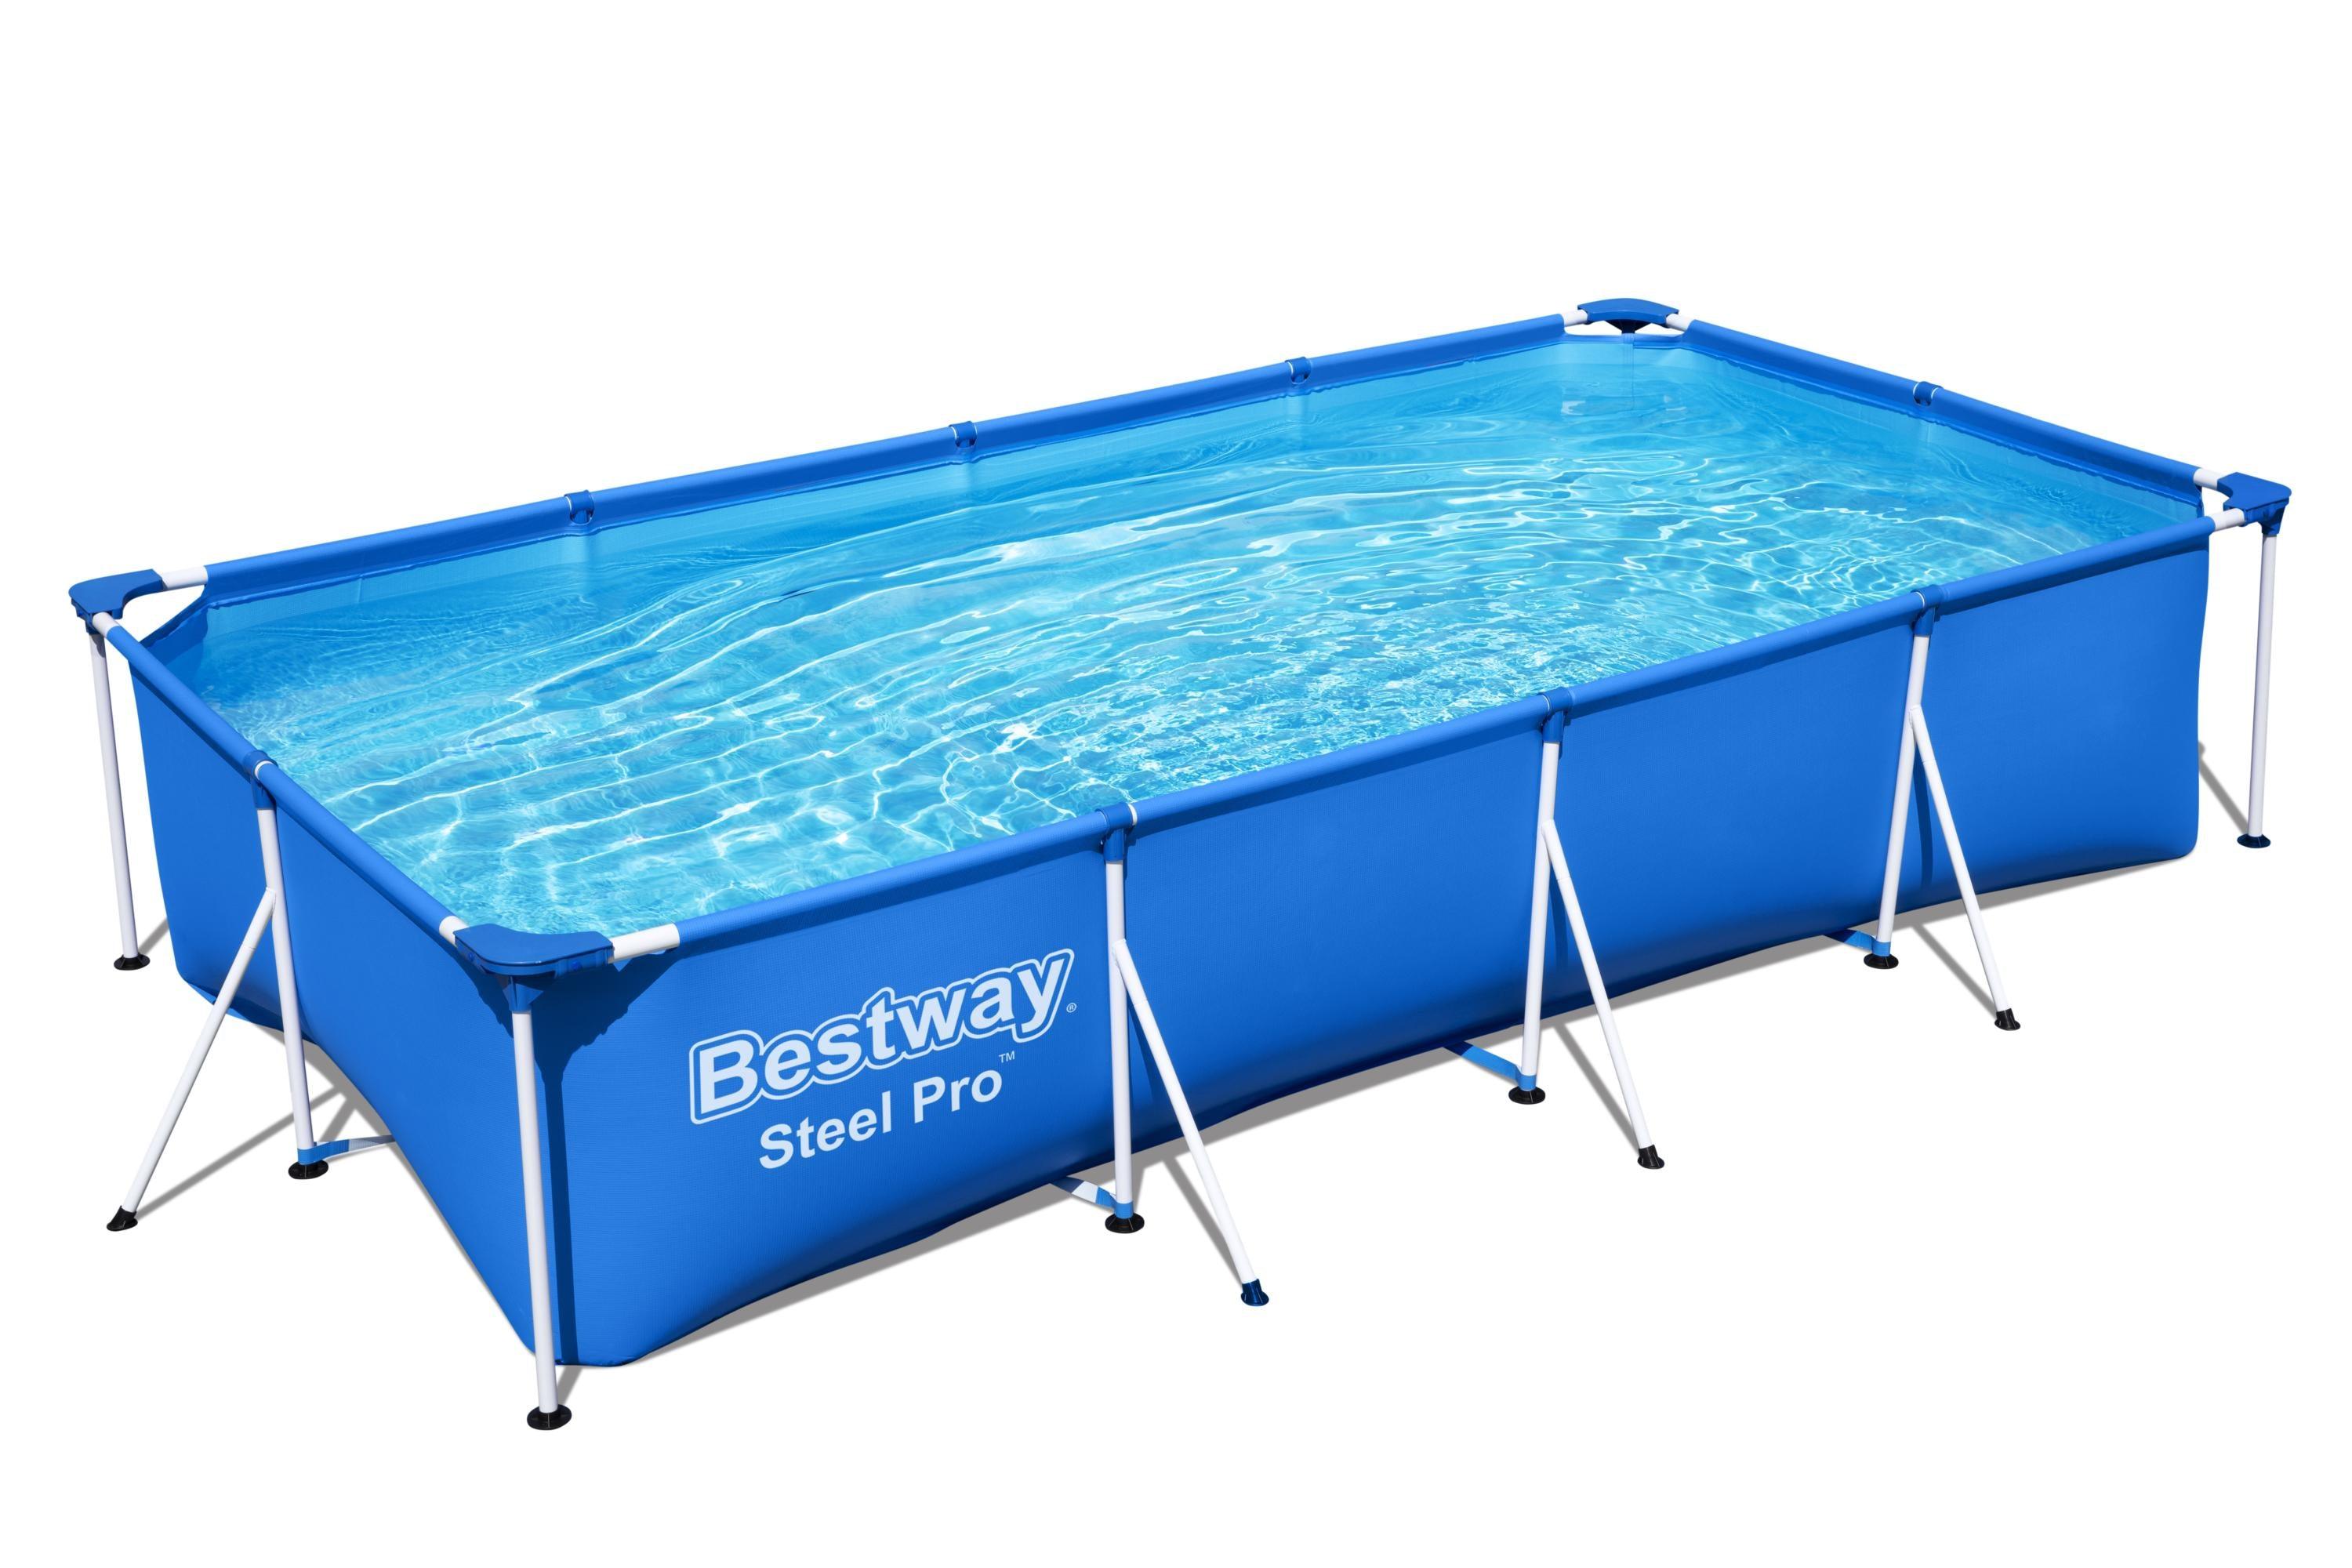 Steel Pro Frame Pool, 400 x 211 x 81 cm, without pump, square, blue - Ourkids - Bestway